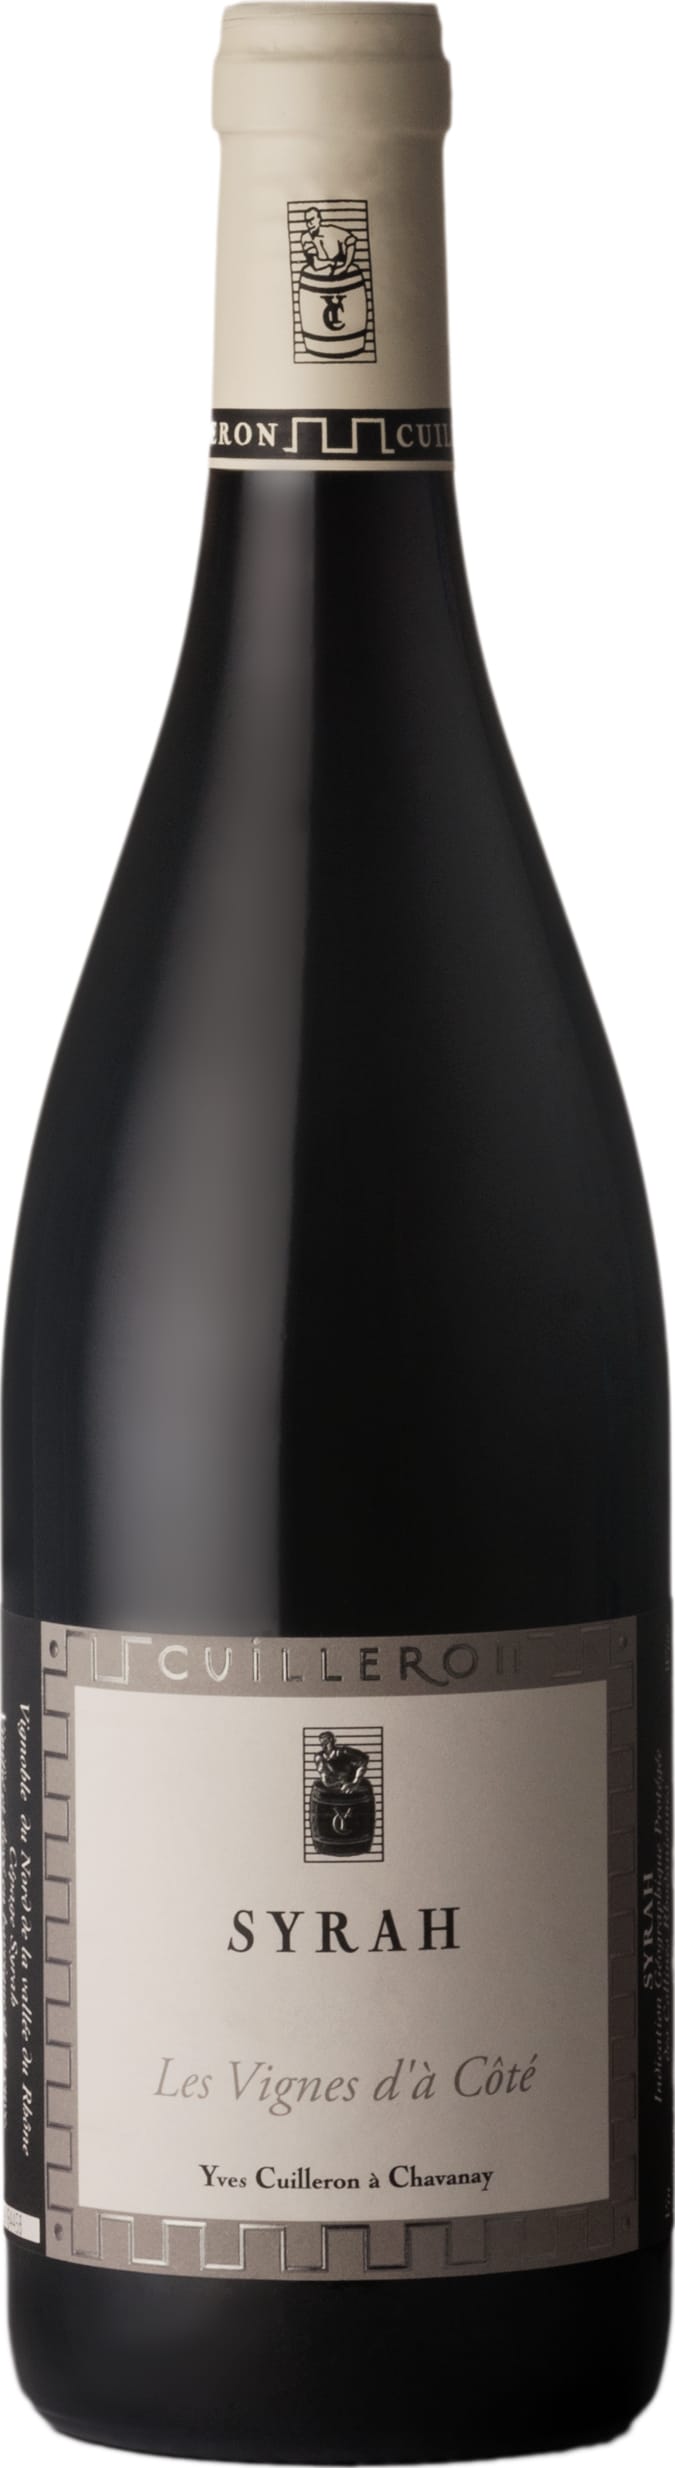 Yves Cuilleron Syrah Les Vignes d'a Cote 2022 75cl - Buy Yves Cuilleron Wines from GREAT WINES DIRECT wine shop